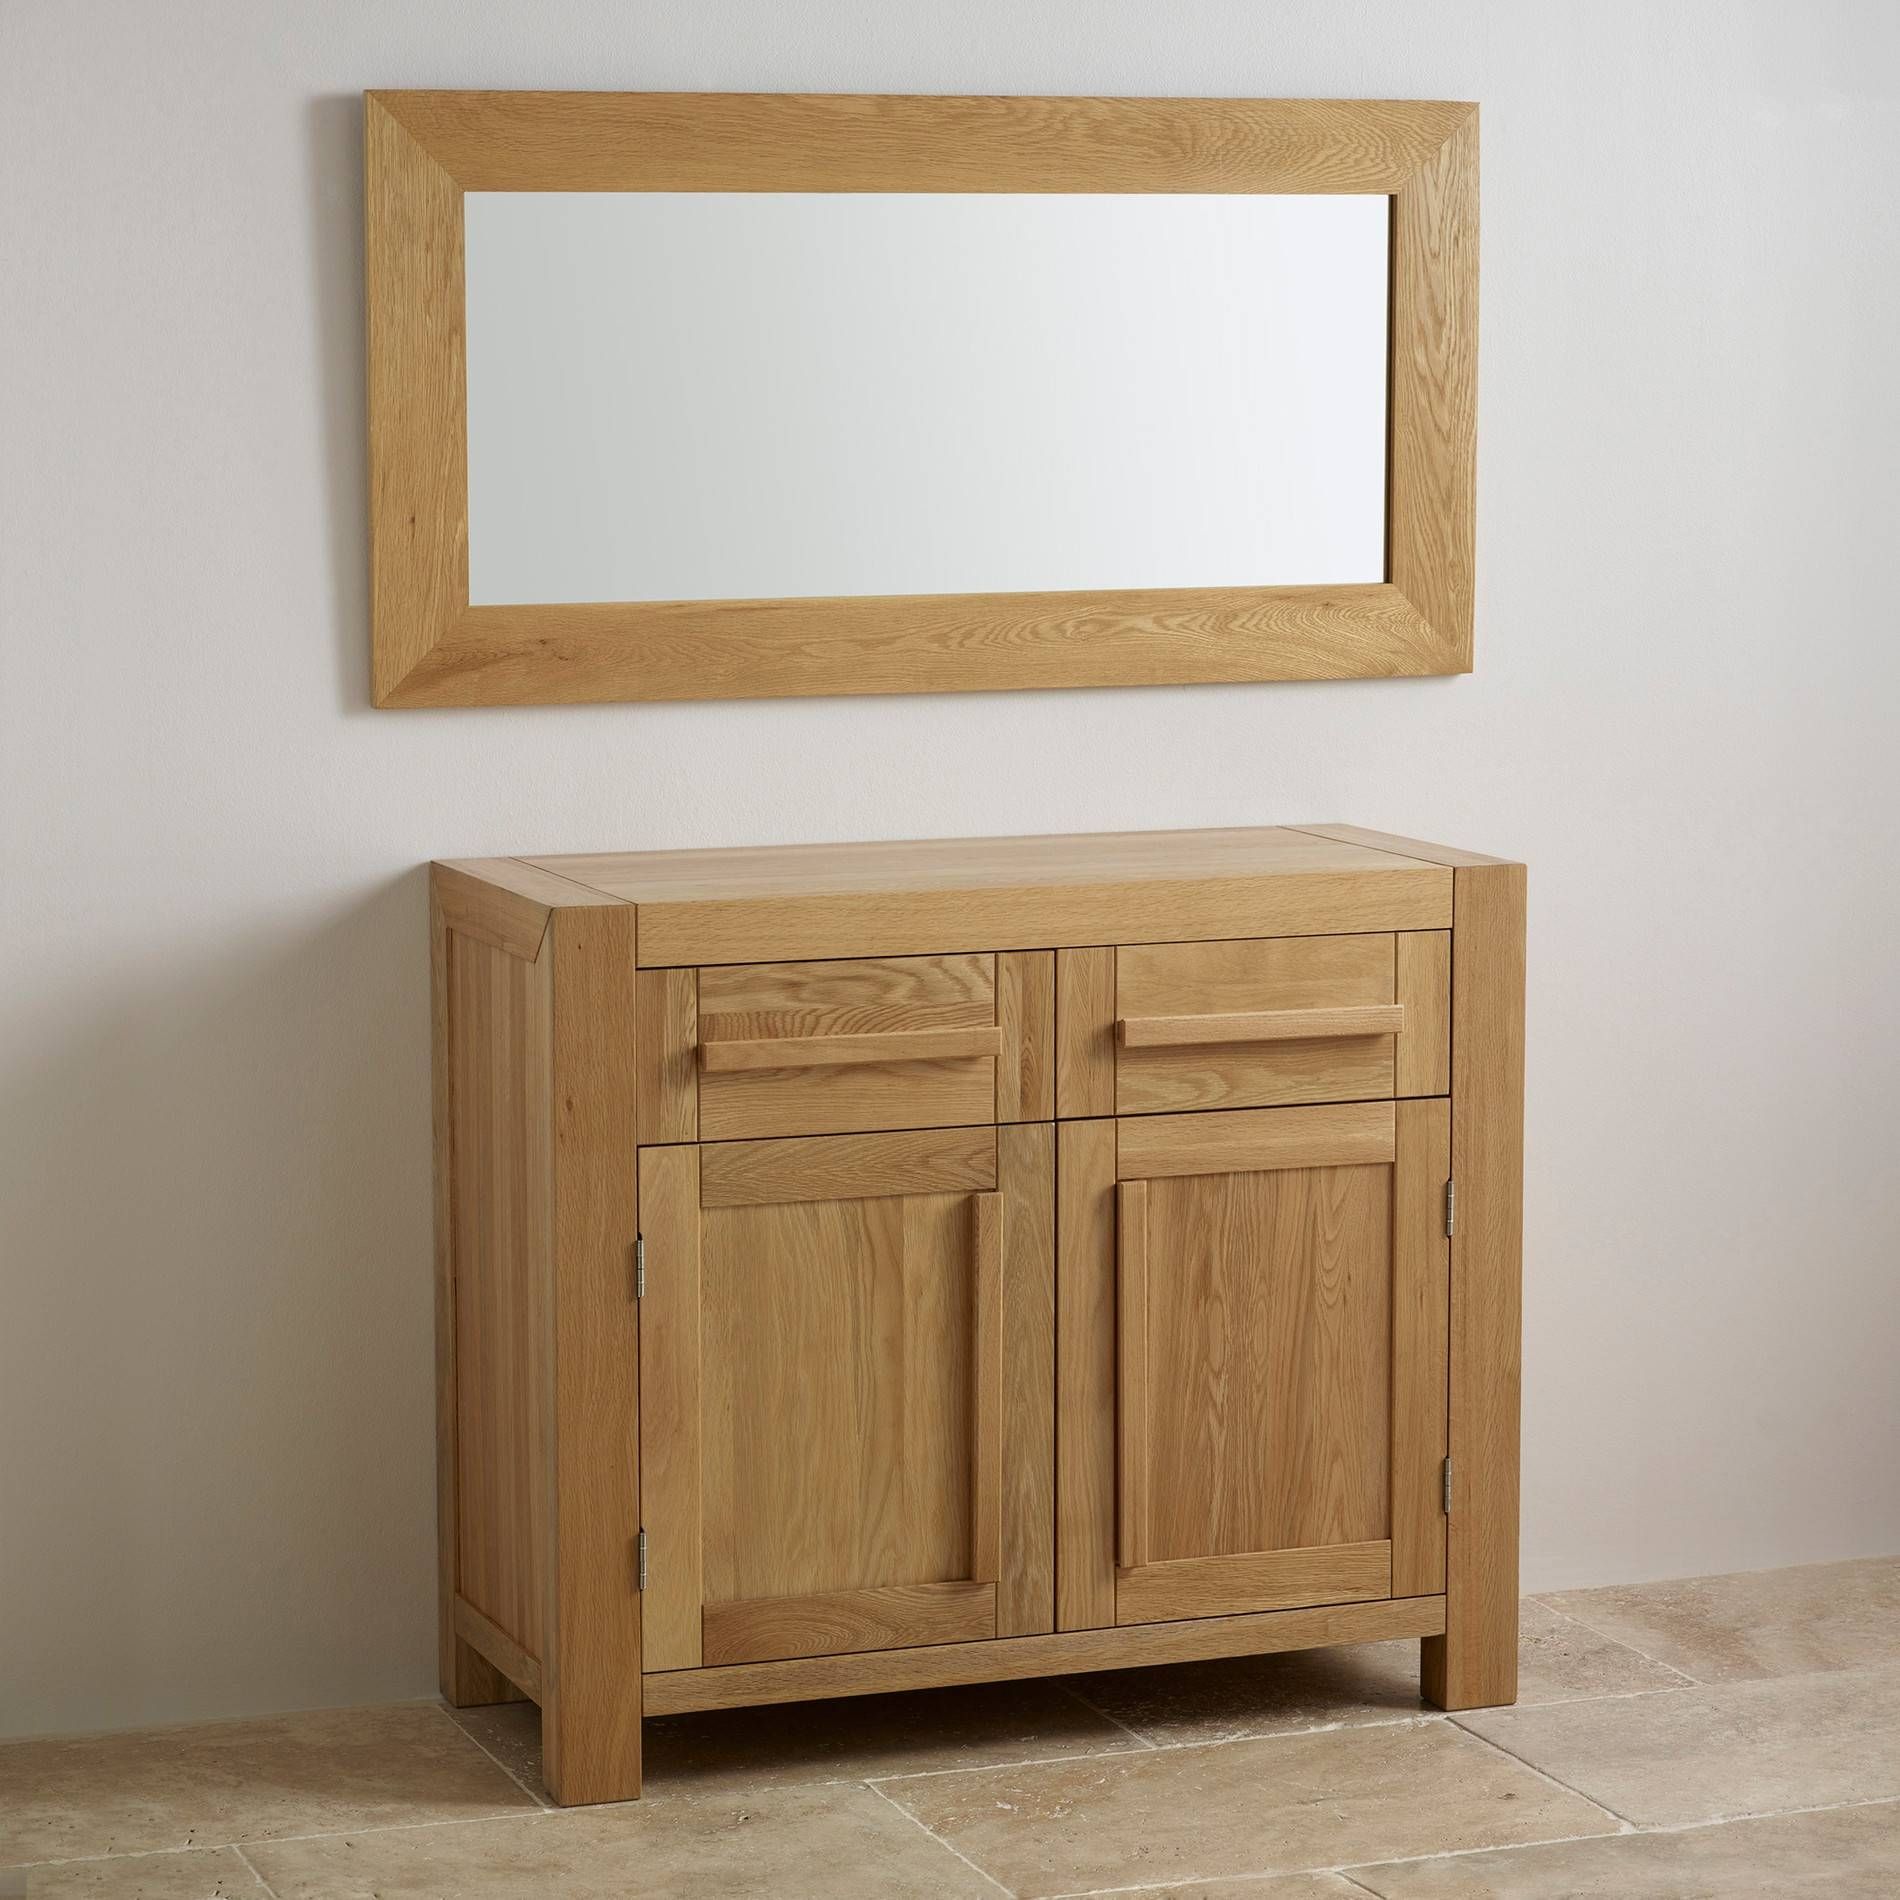 Mirrors | Bring Light To Your Room | Oak Furniture Land Regarding Oak Mirrors (View 7 of 15)